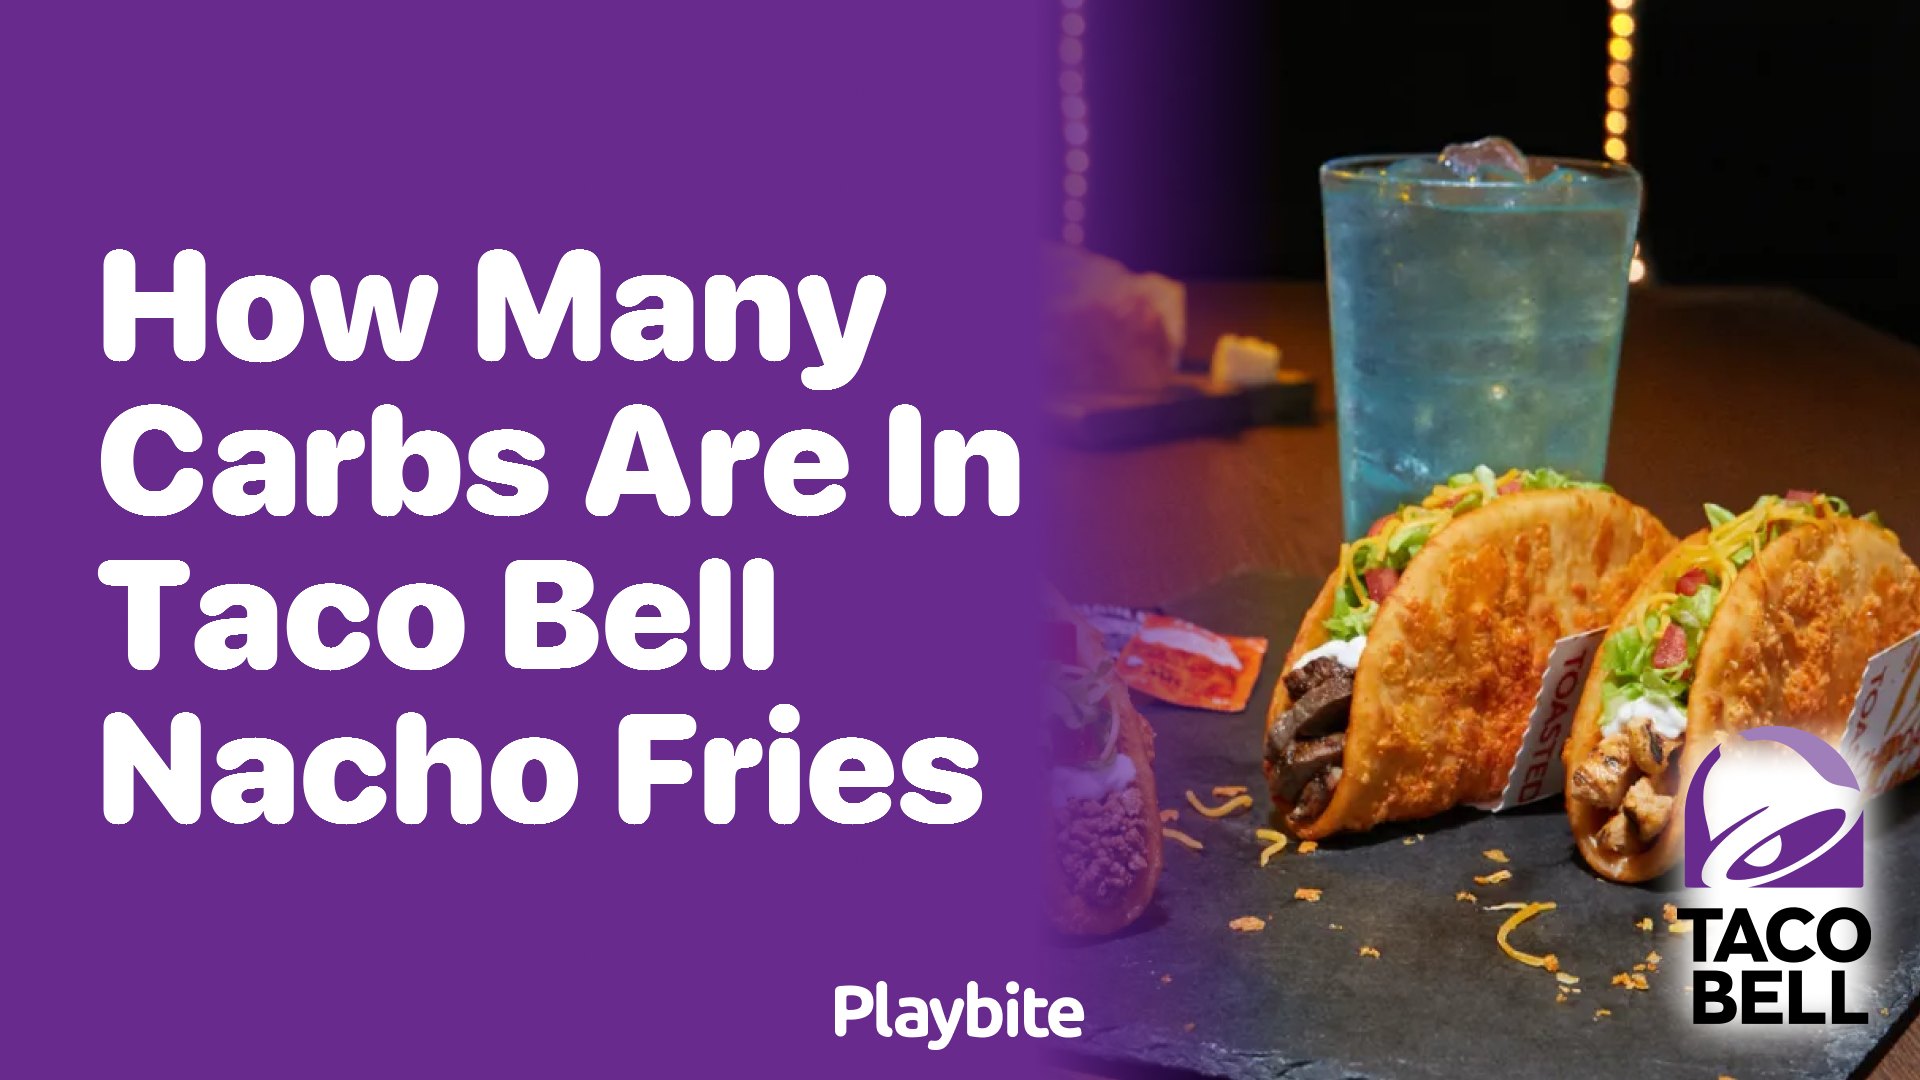 How Many Carbs Are in Taco Bell Nacho Fries?